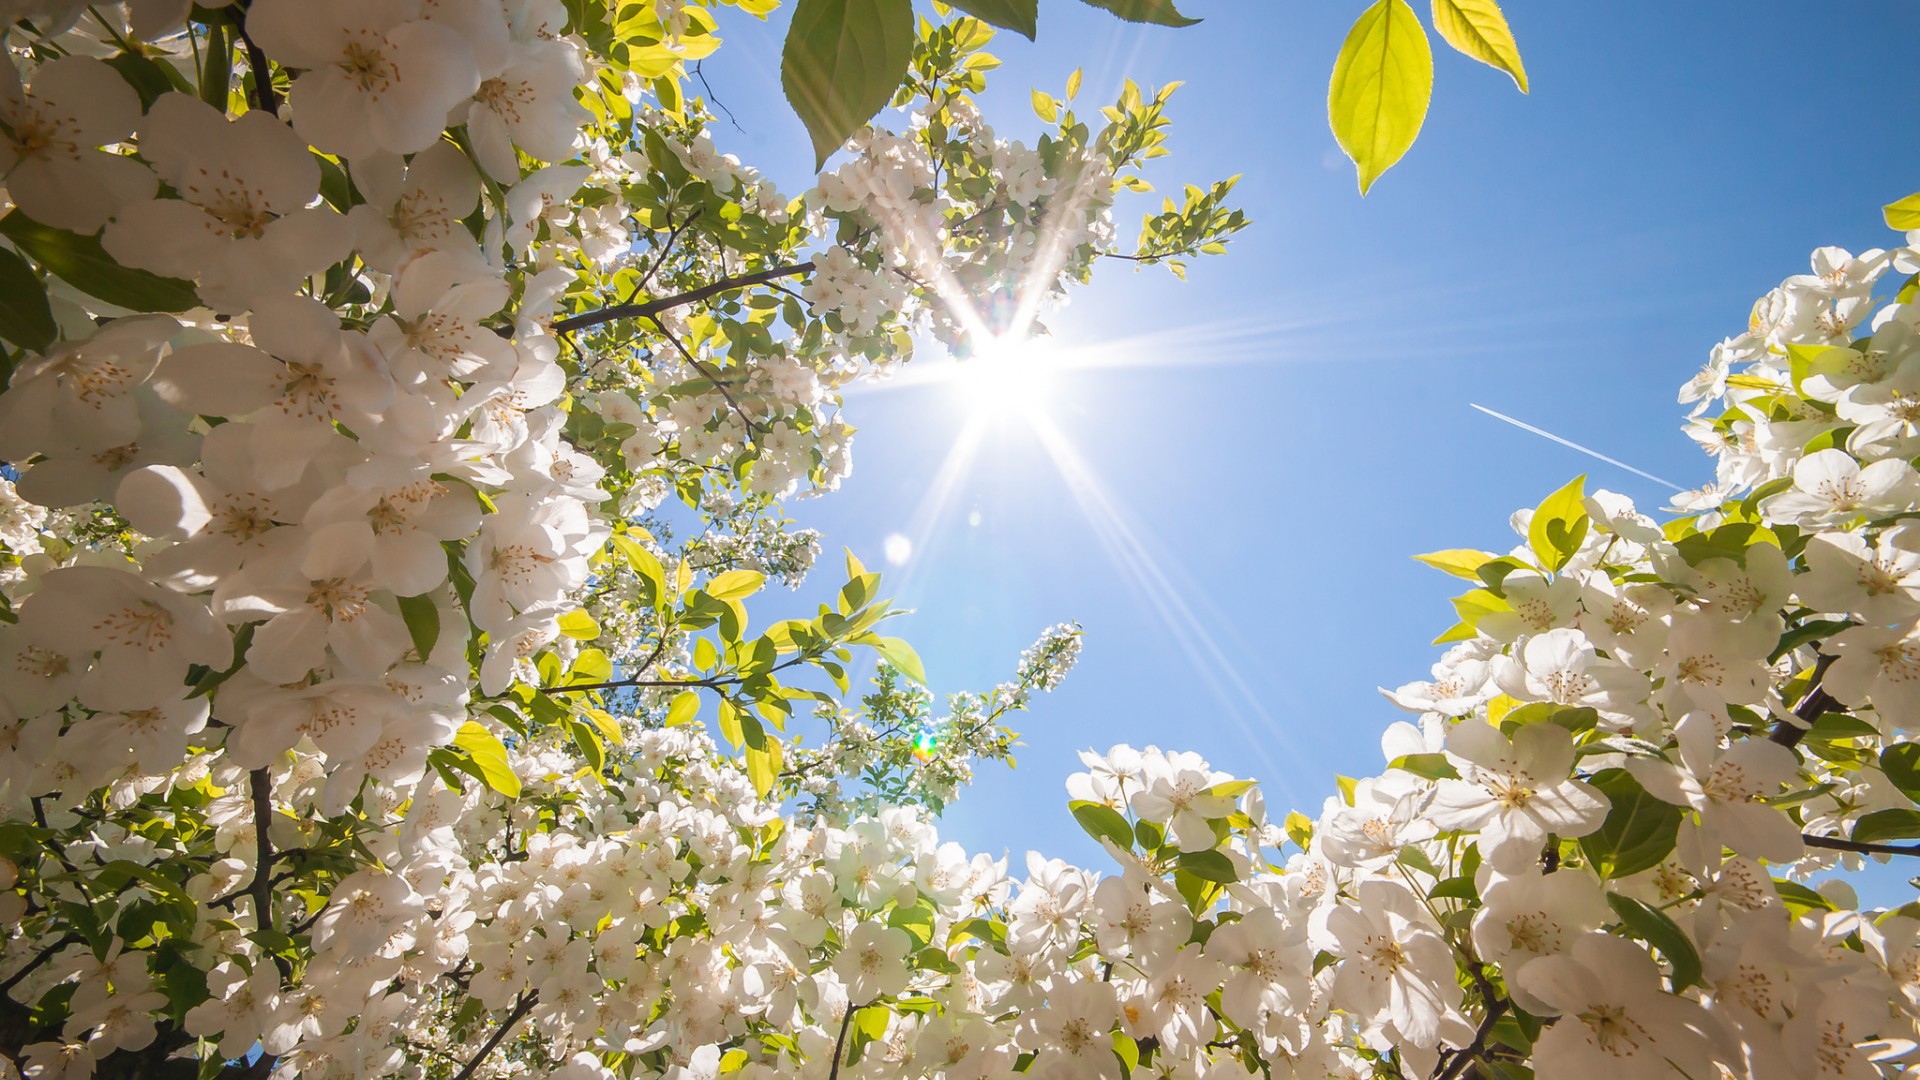 sunshine hitting white flowers spring pictures backgrounds hd free, nature, floral